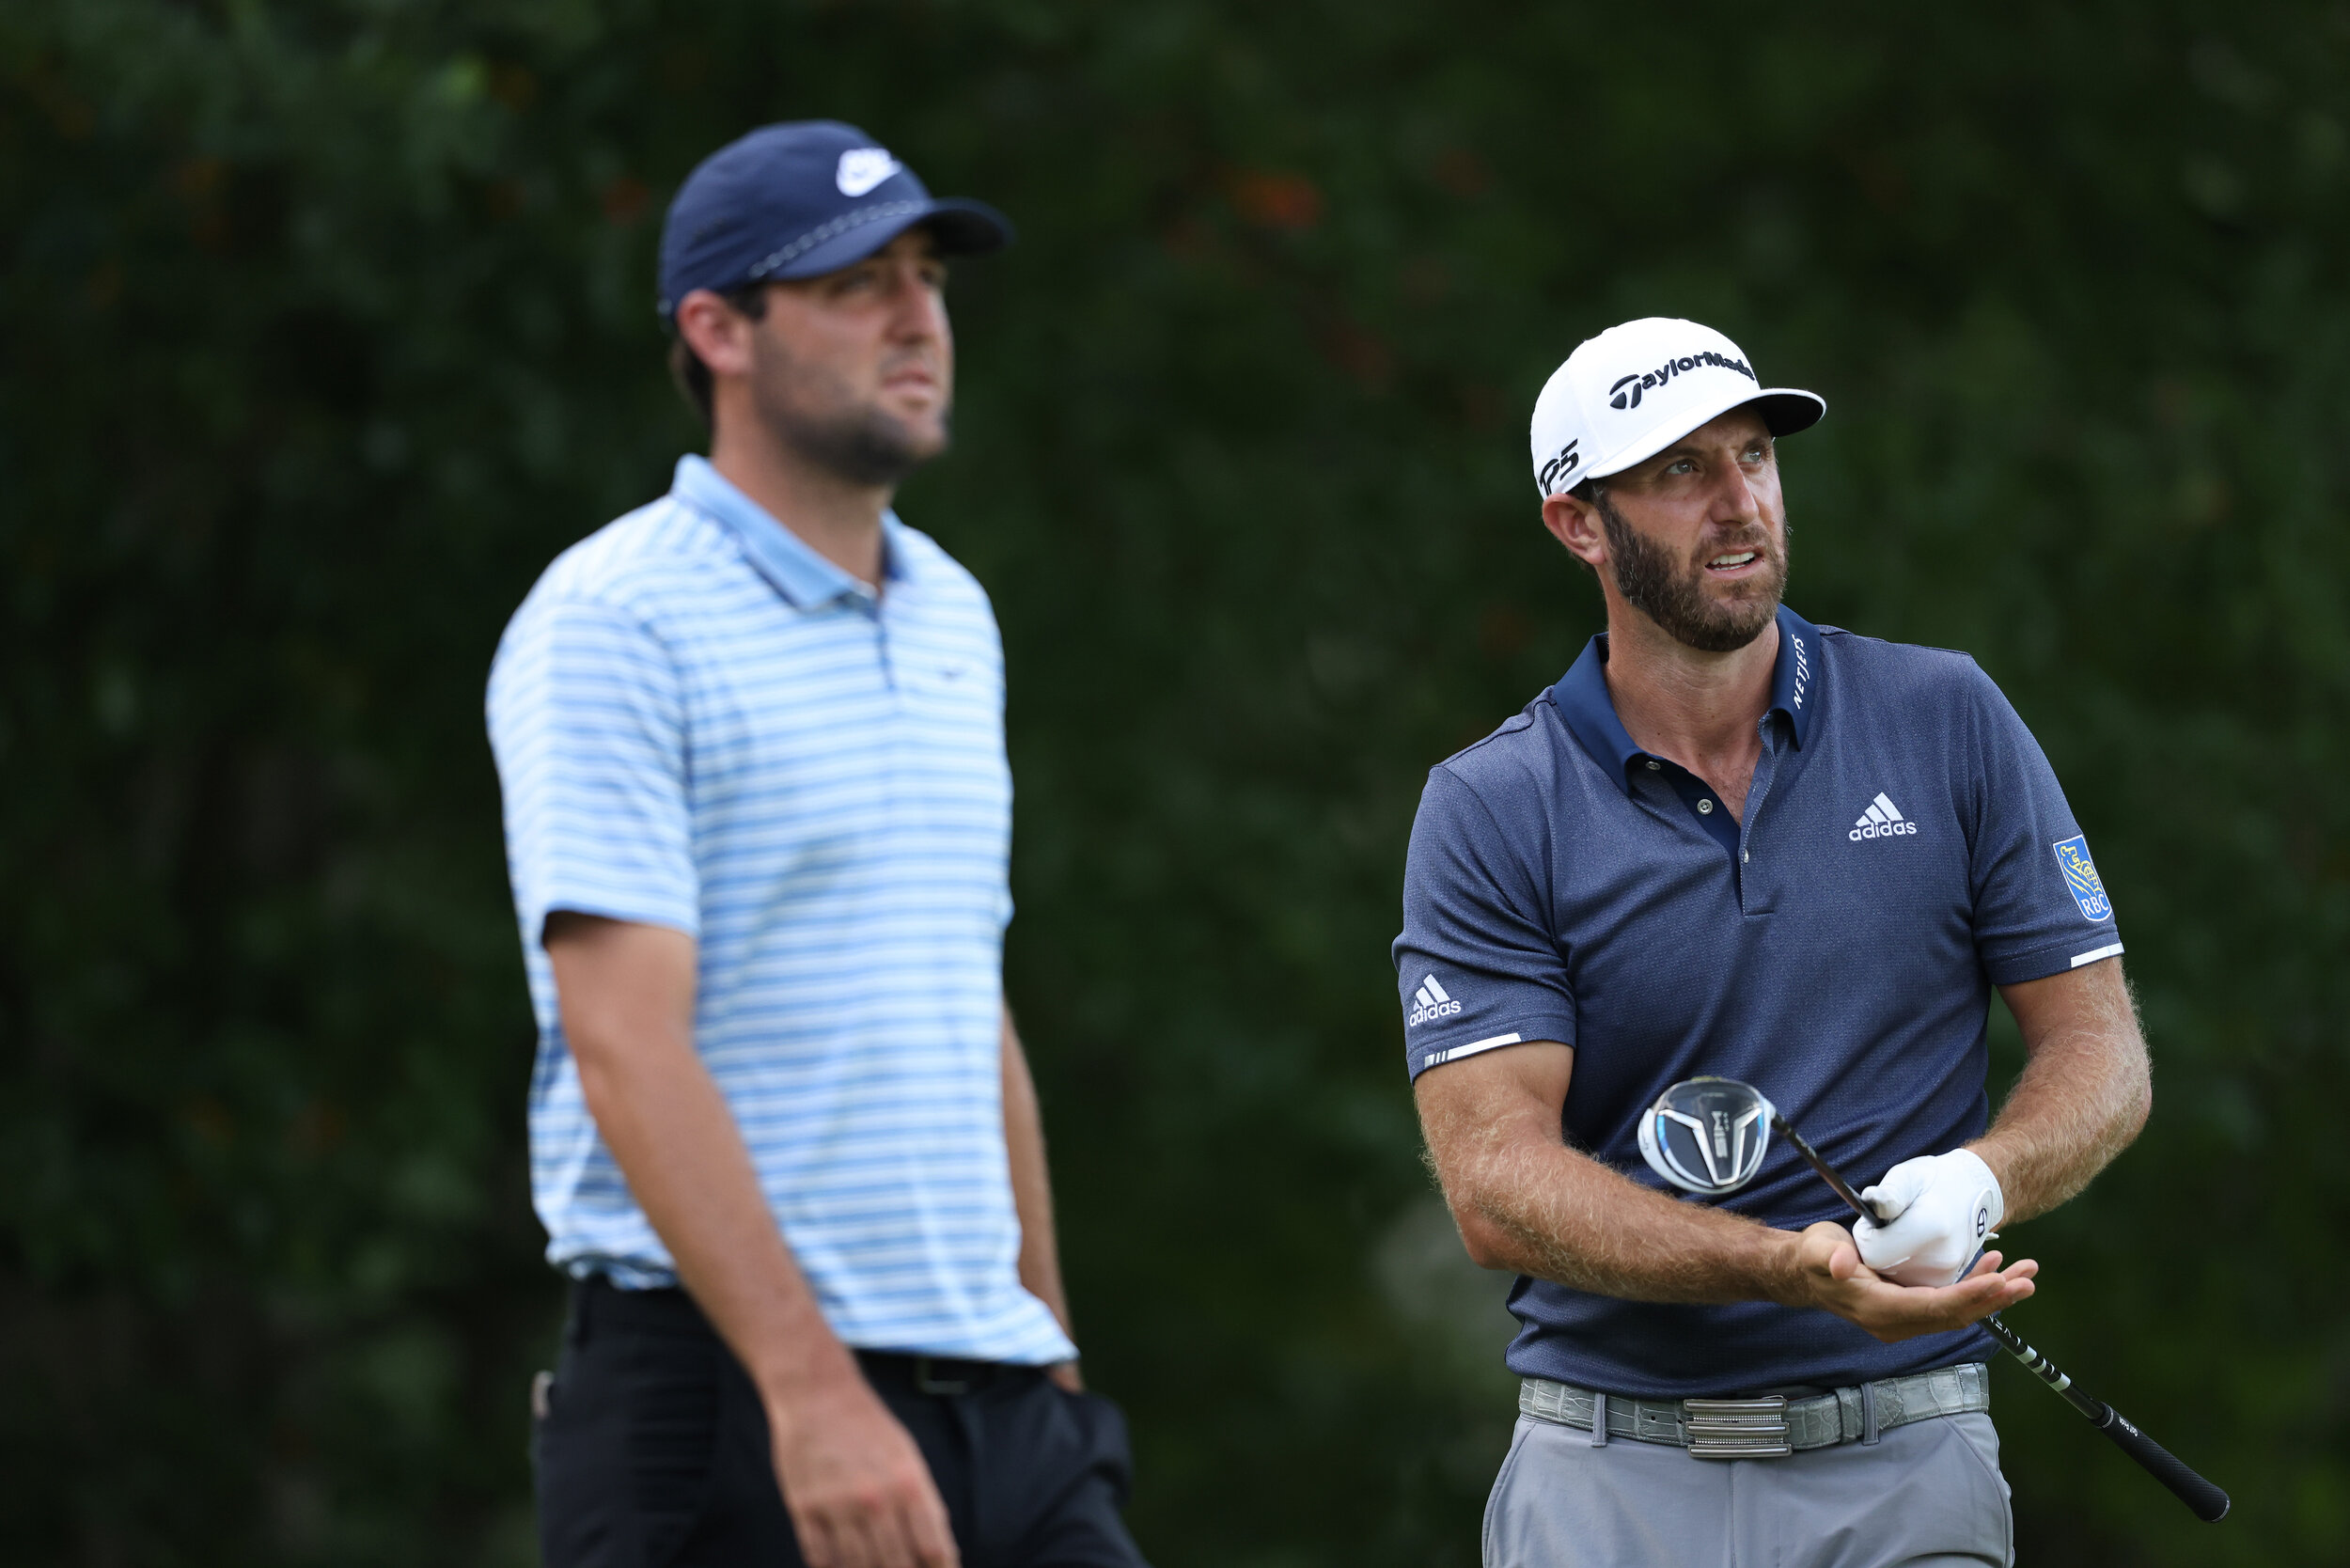  NORTON, MASSACHUSETTS - AUGUST 22: Scottie Scheffler (L) of the United States and Dustin Johnson (R) of the United States look on from the fourth tee during the third round of The Northern Trust at TPC Boston on August 22, 2020 in Norton, Massachuse